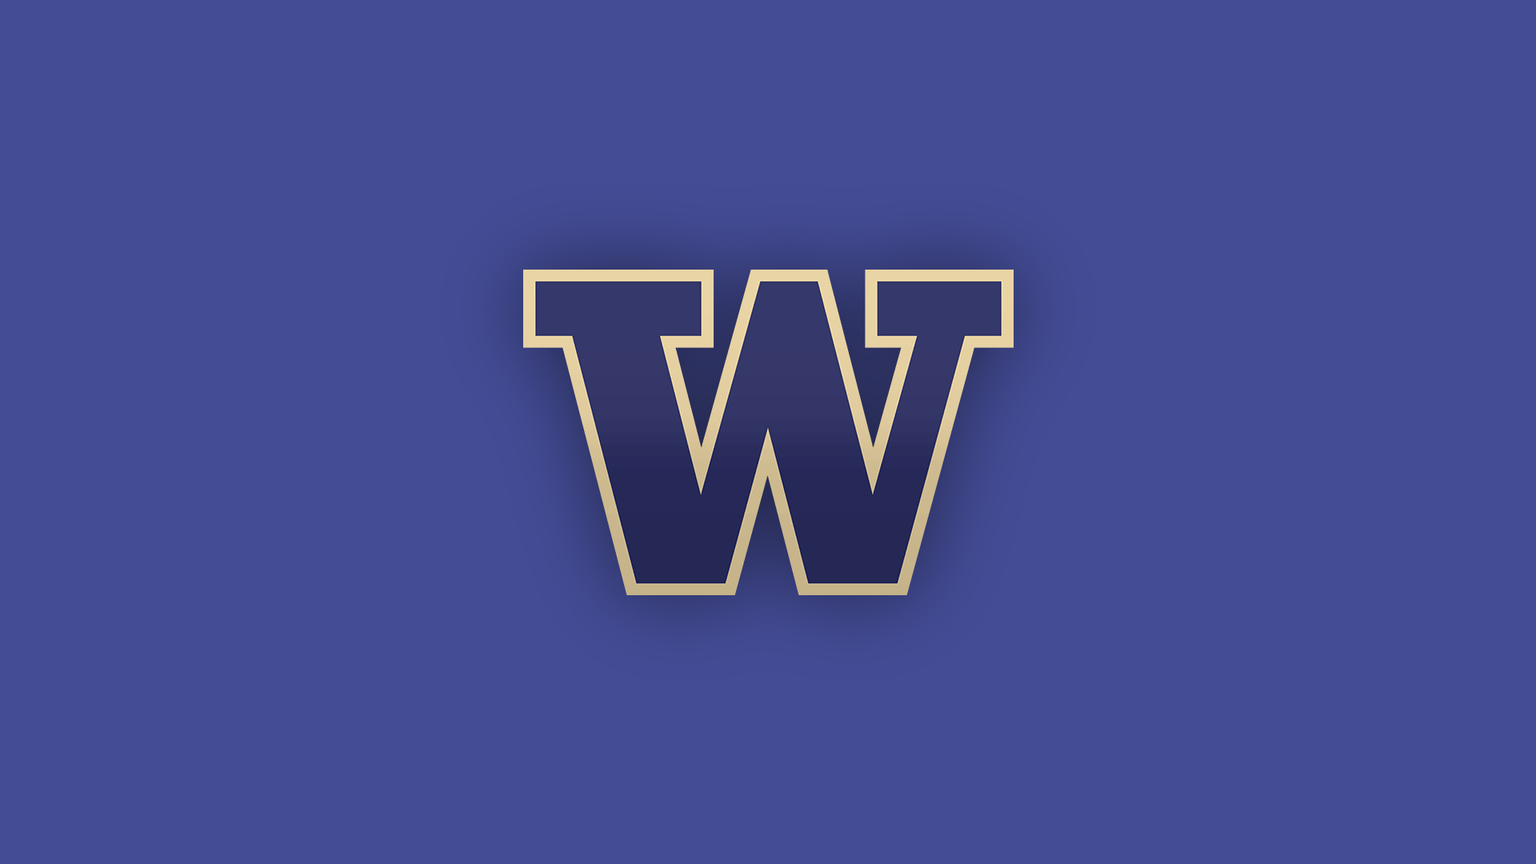 How to Watch The Washington Huskies Live Without Cable in 202122 The